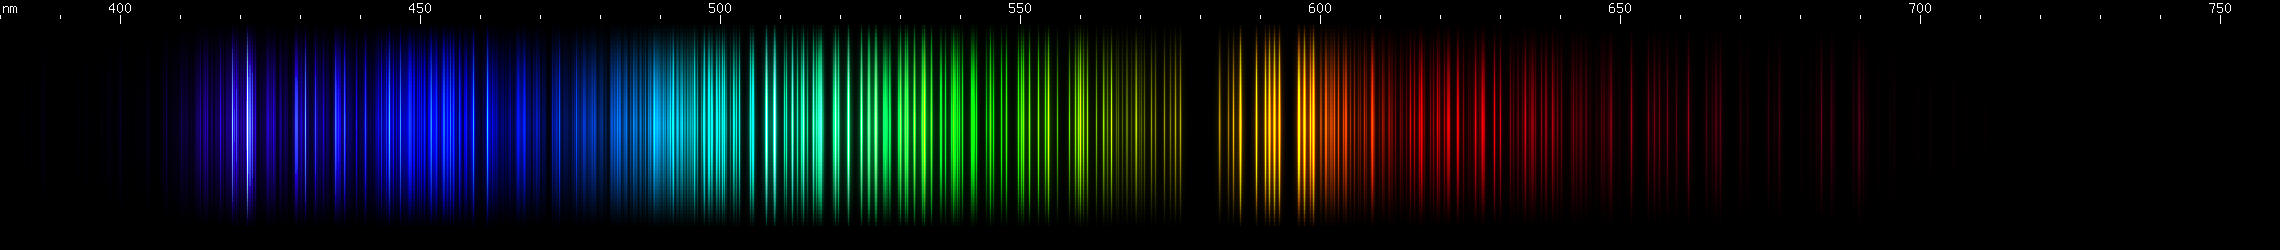 Spectral Lines of Dysprosium